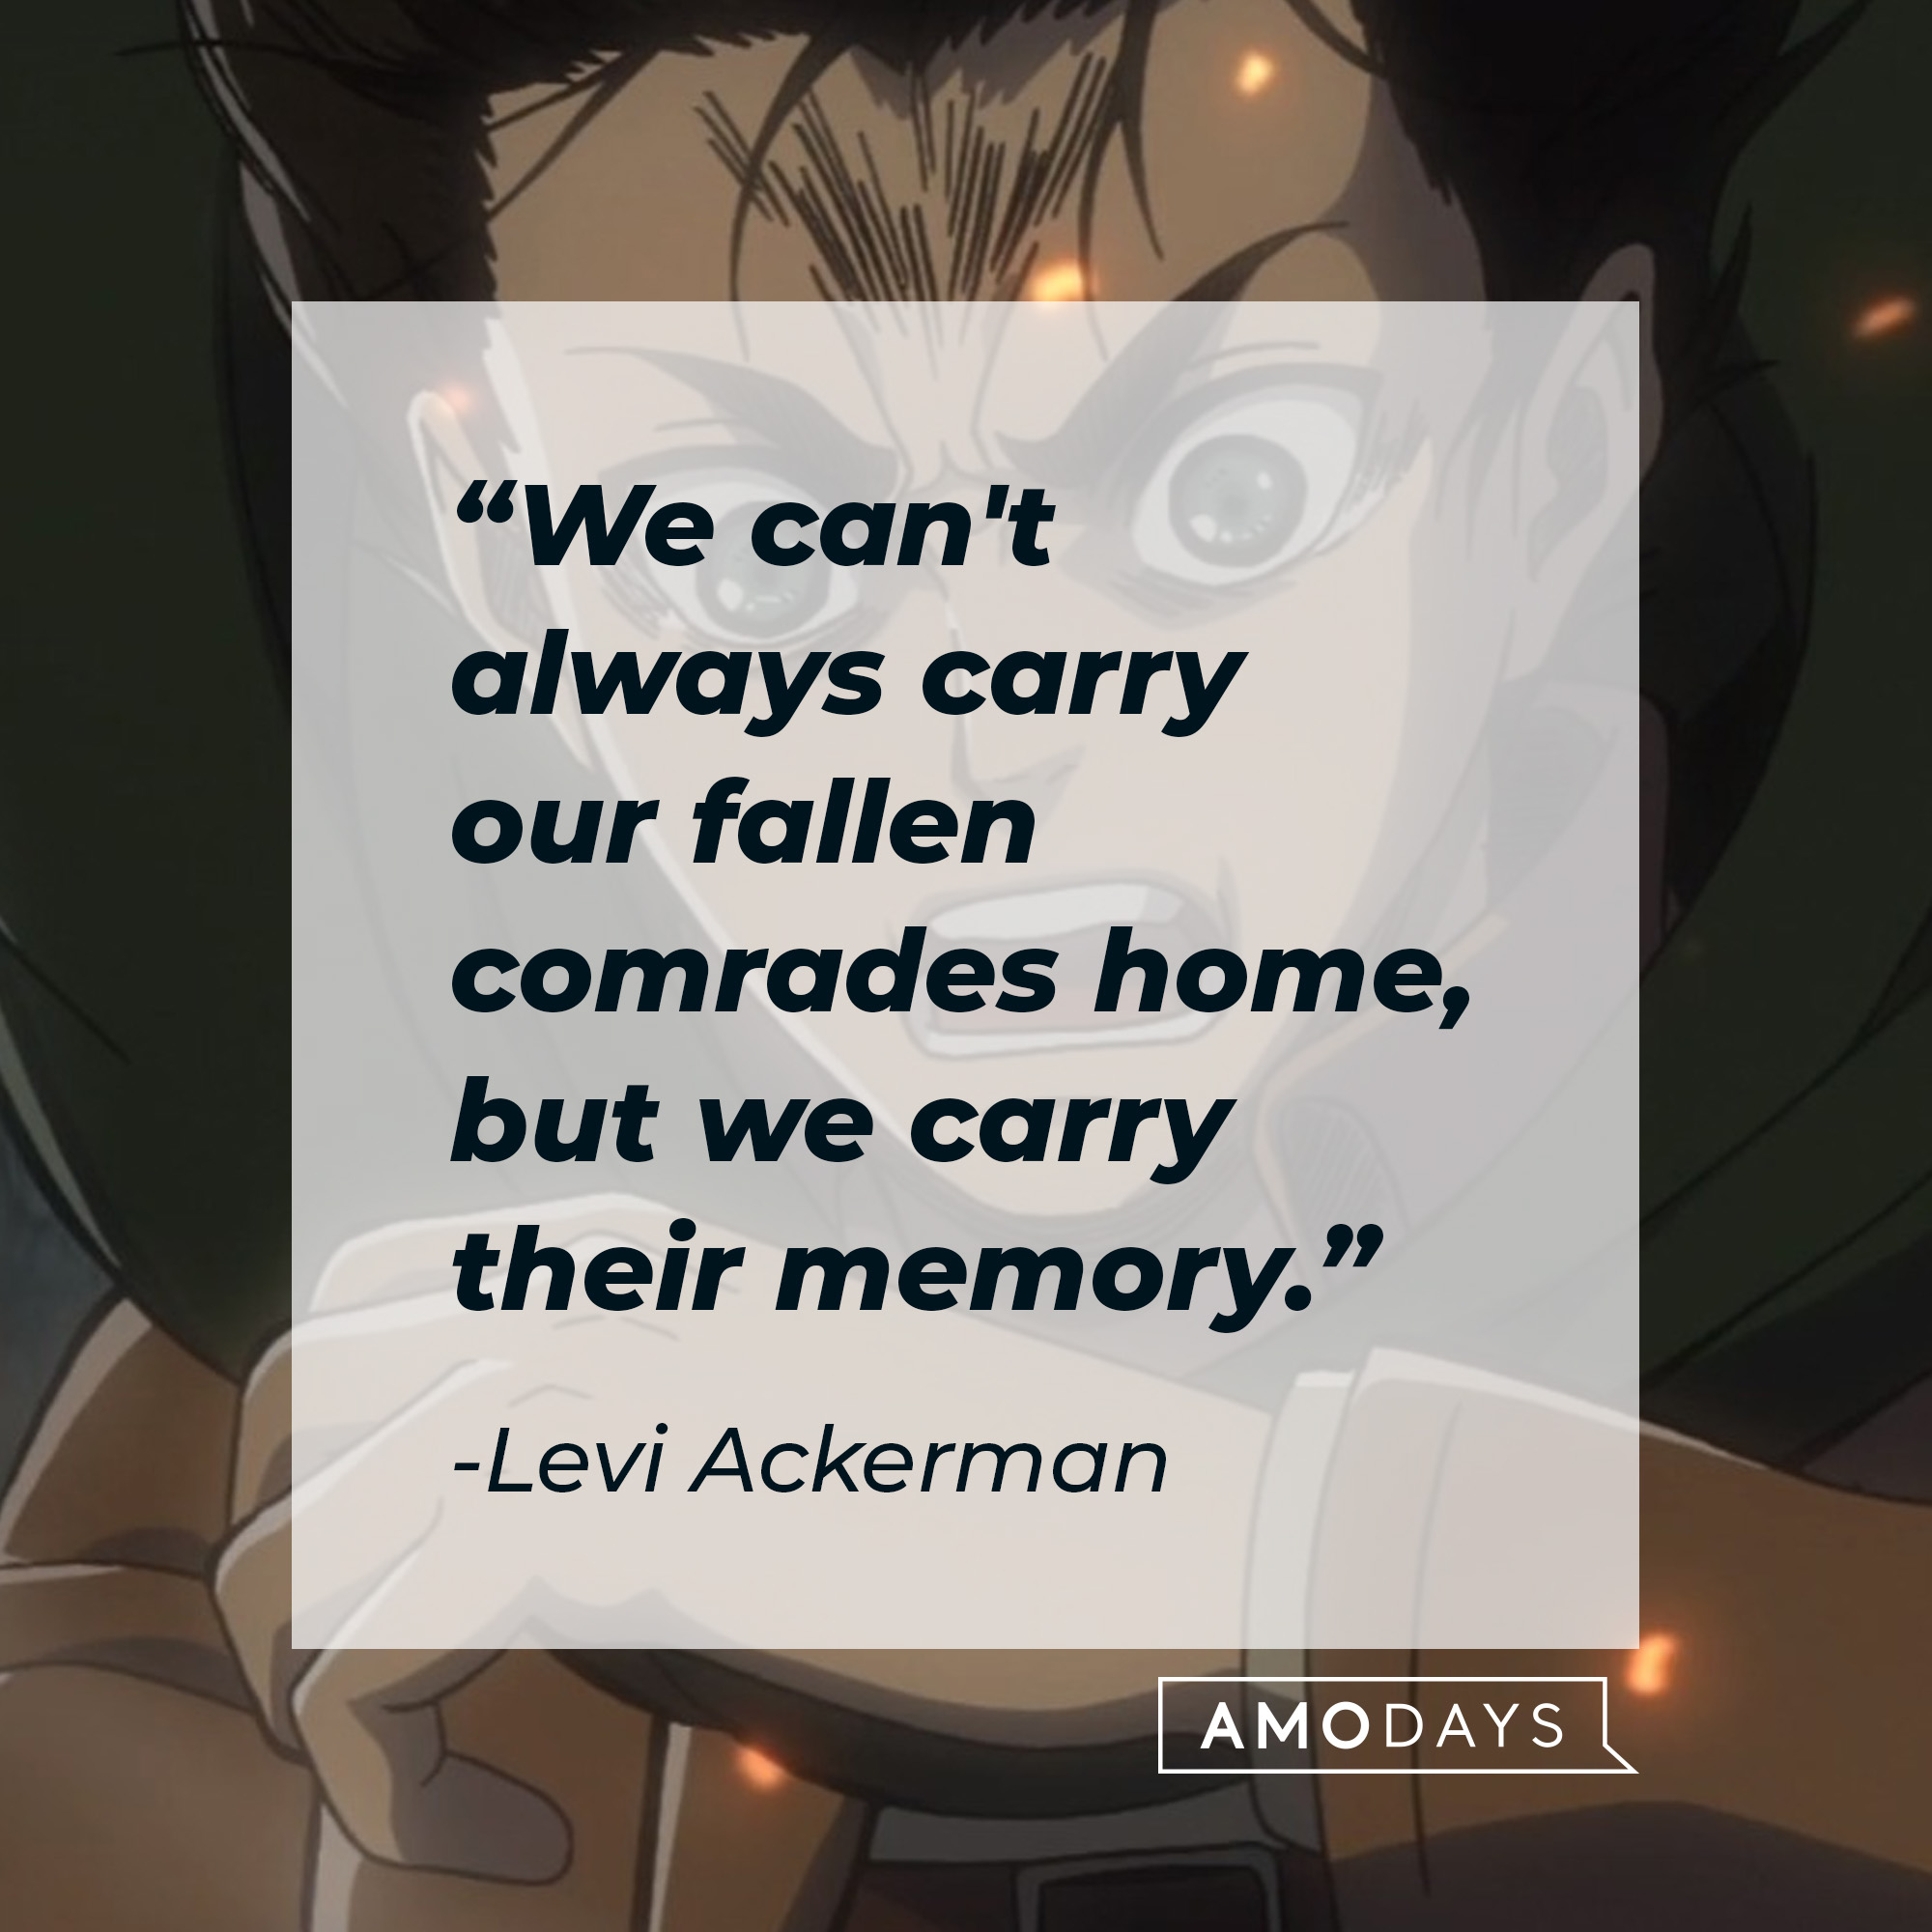 Levi Ackerman, with his quote: "We can't always carry our fallen comrades home, but we carry their memory.”│Source: facebook.com/AttackOnTitan